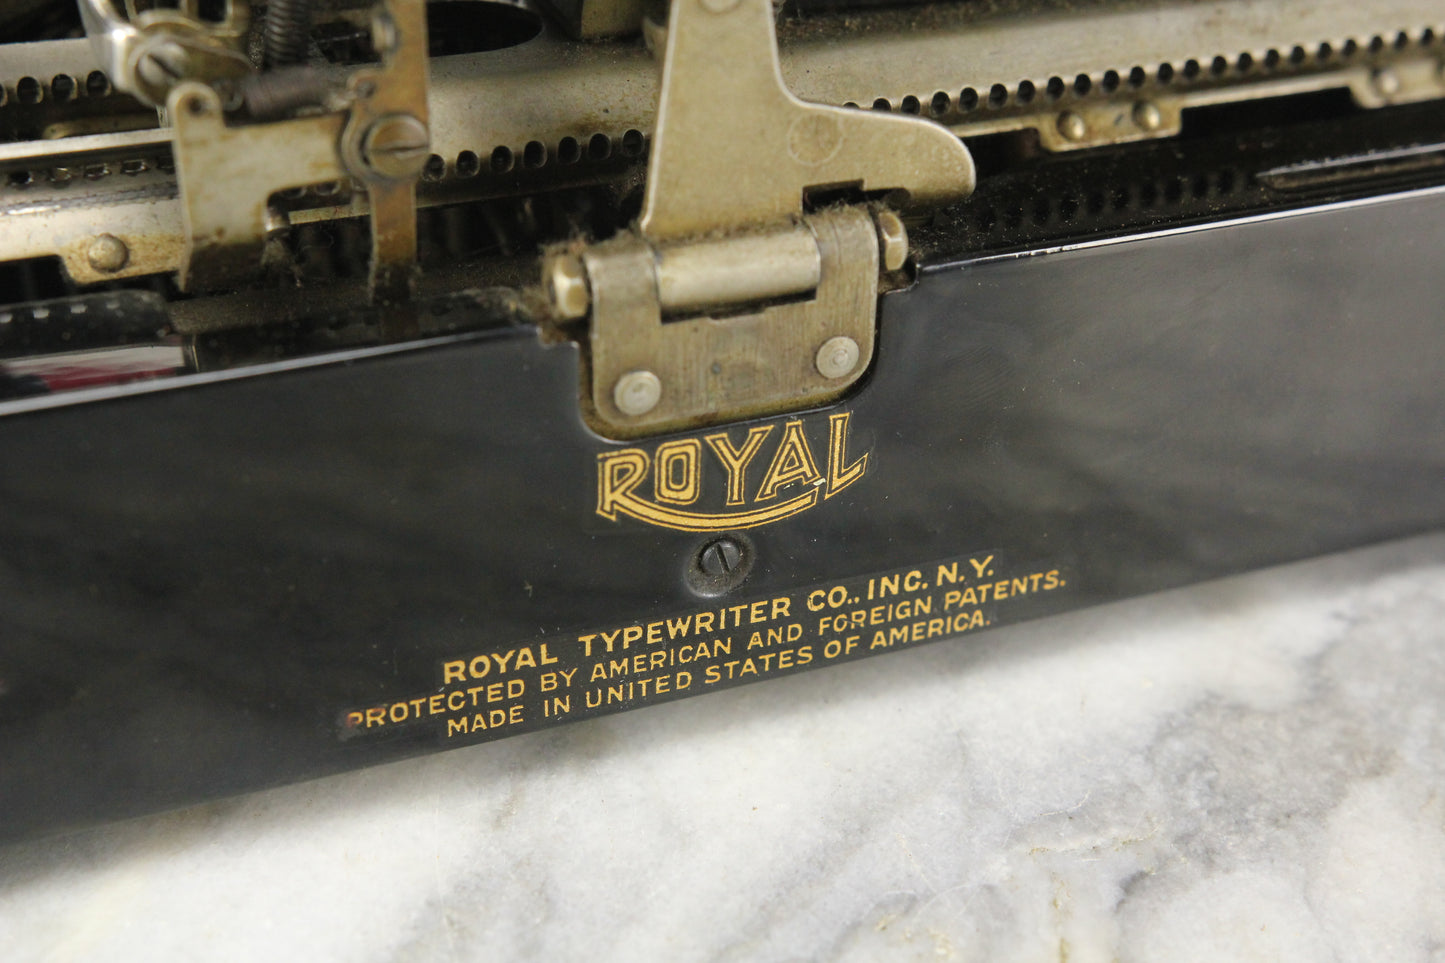 Royal Portable Model "P" Typewriter with Case, Made in USA, 1927